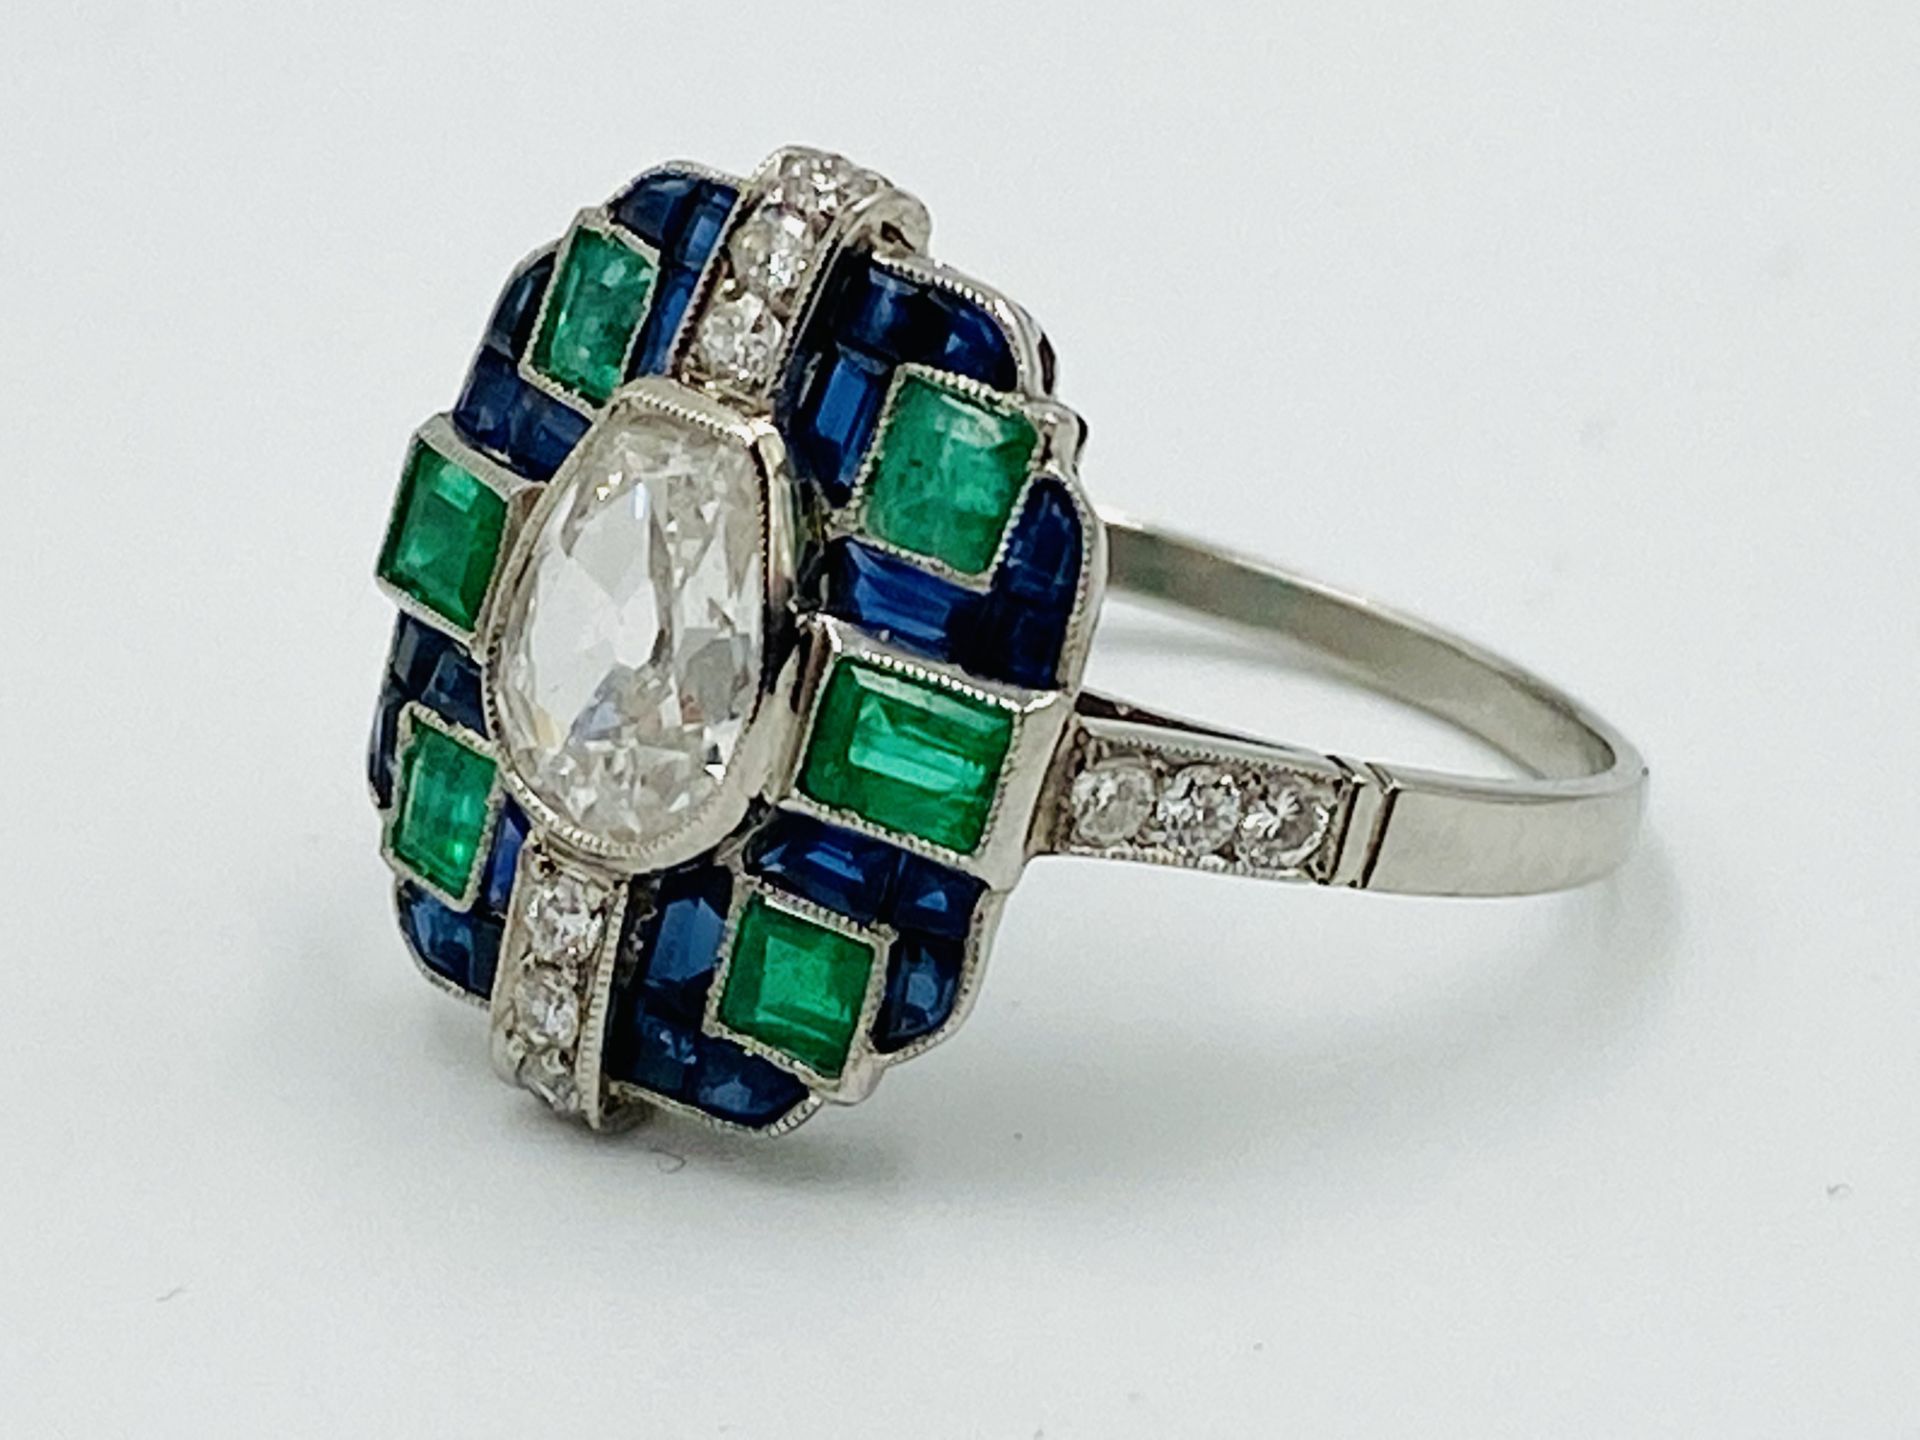 Platinum ring set with diamonds, sapphires and emeralds - Image 2 of 5